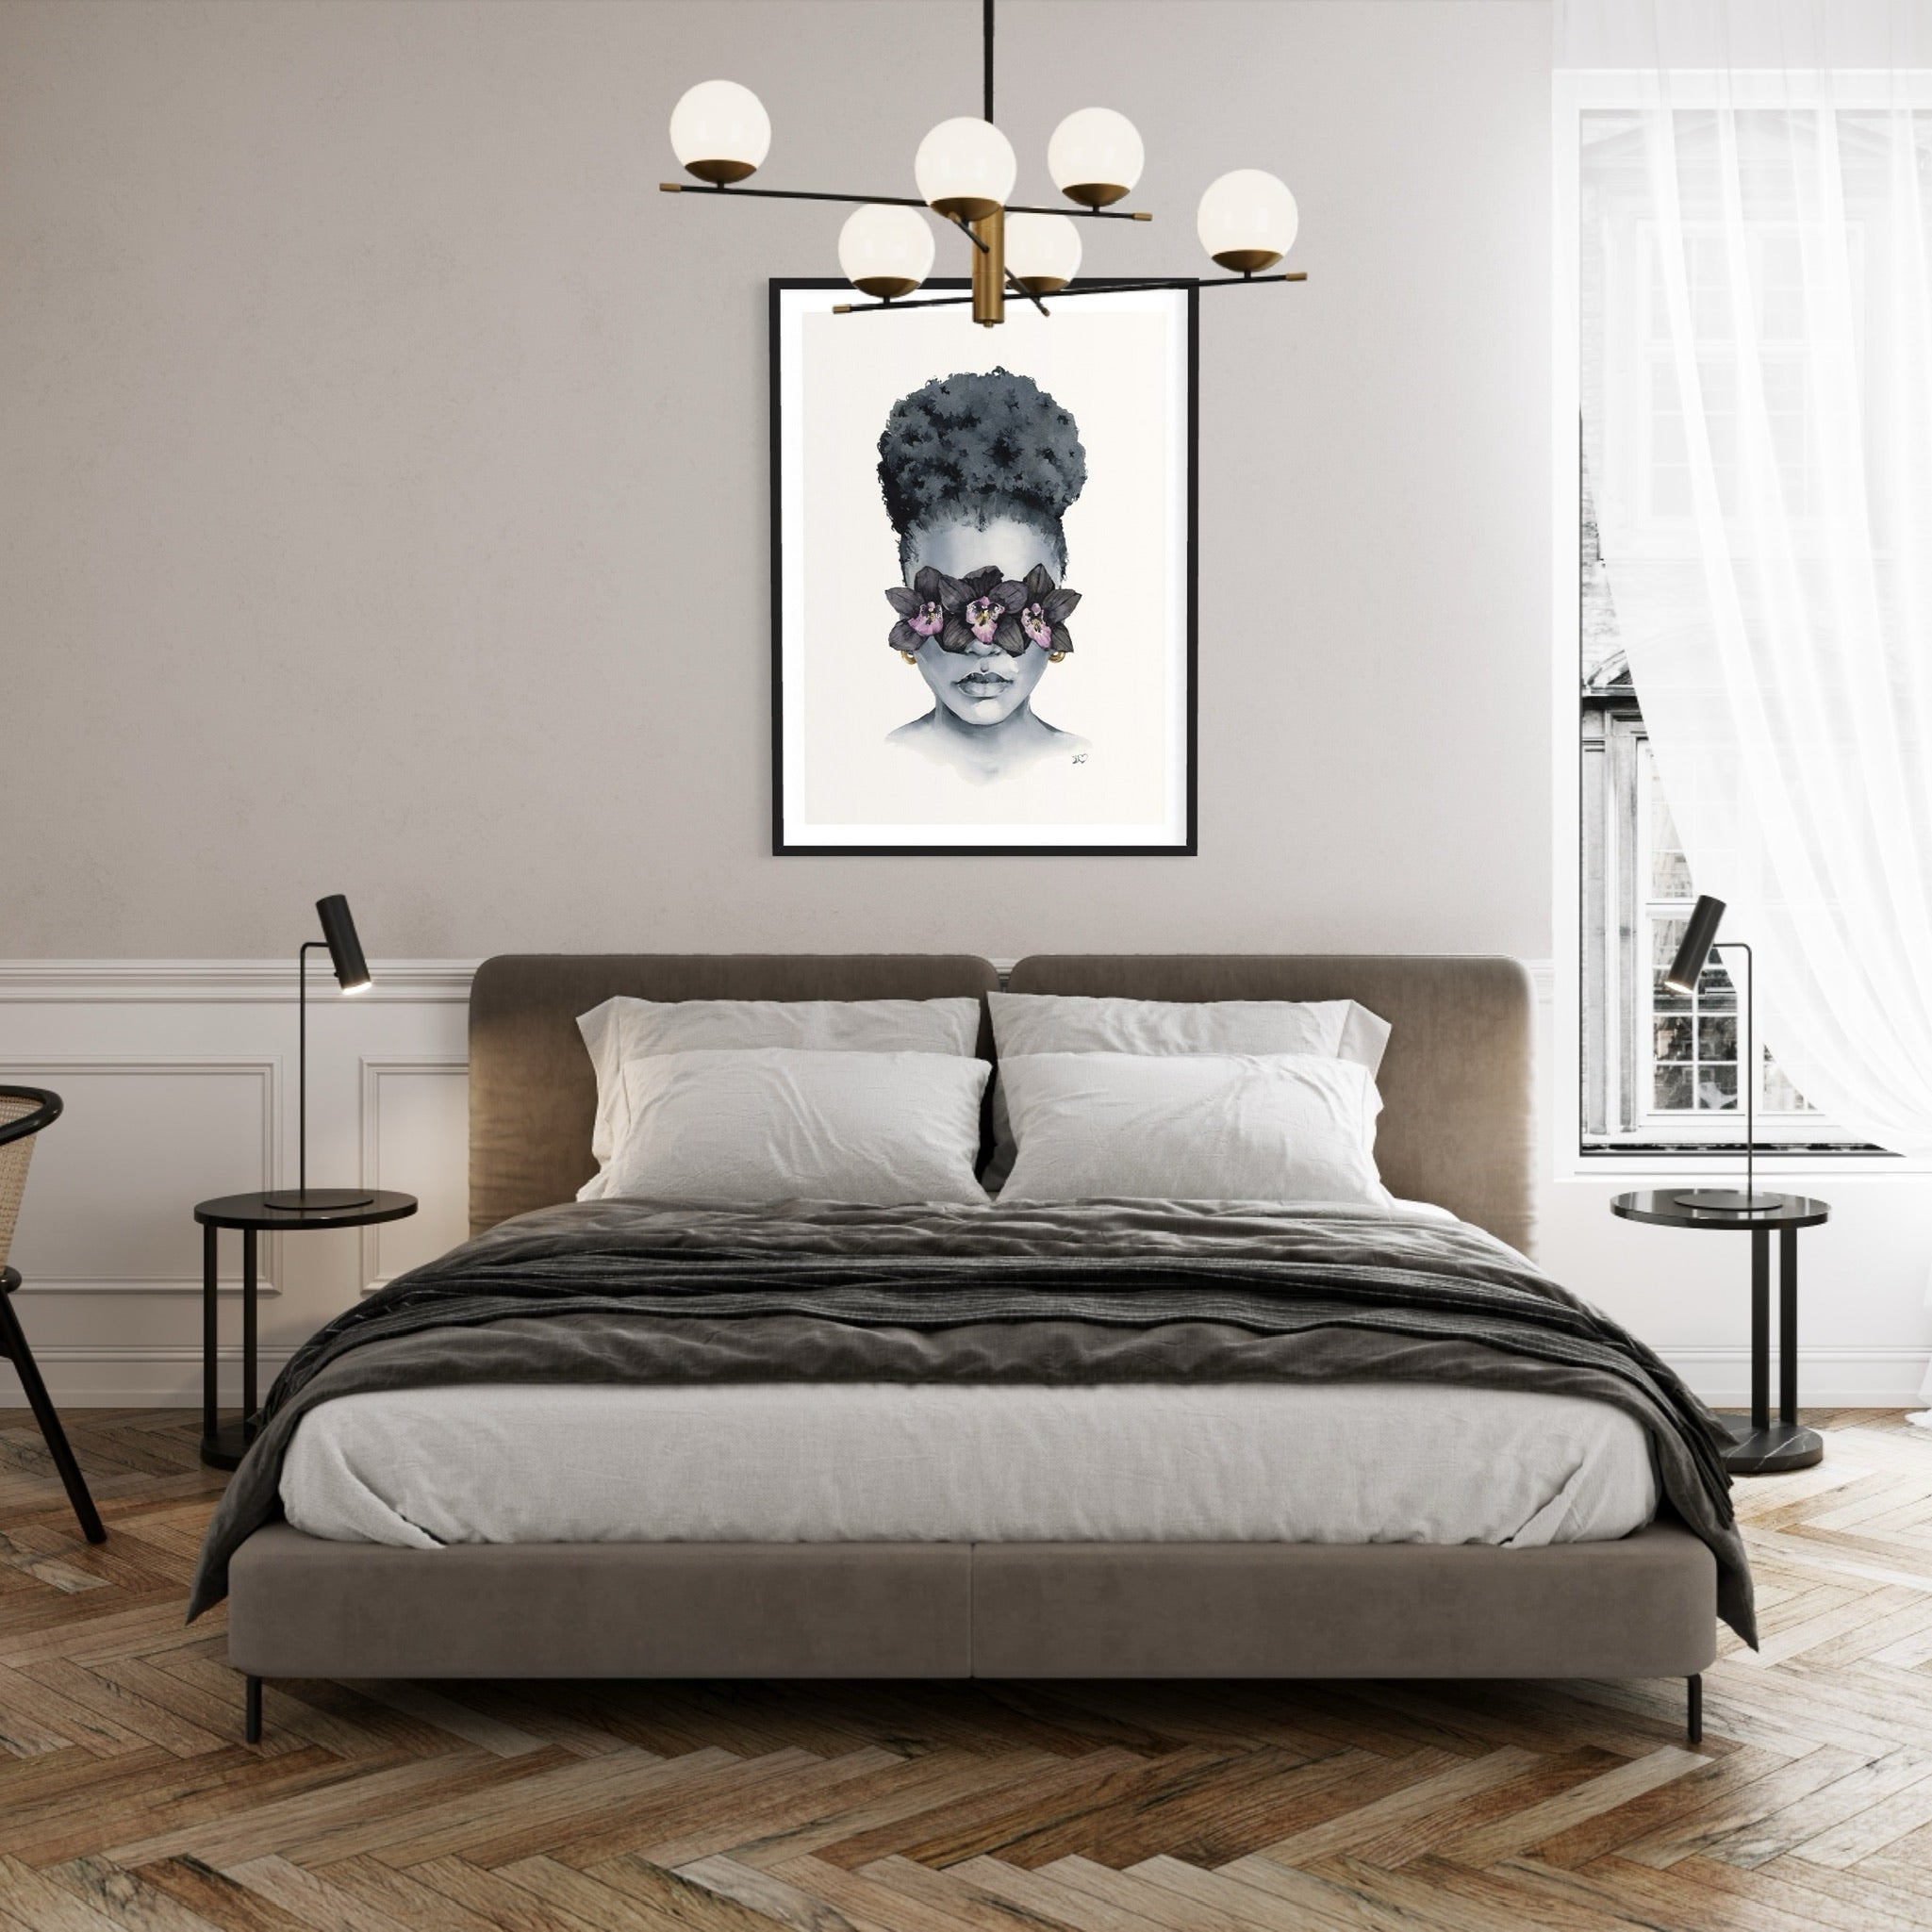 Black Orchid blindfolded print by Polina Bright  in interior